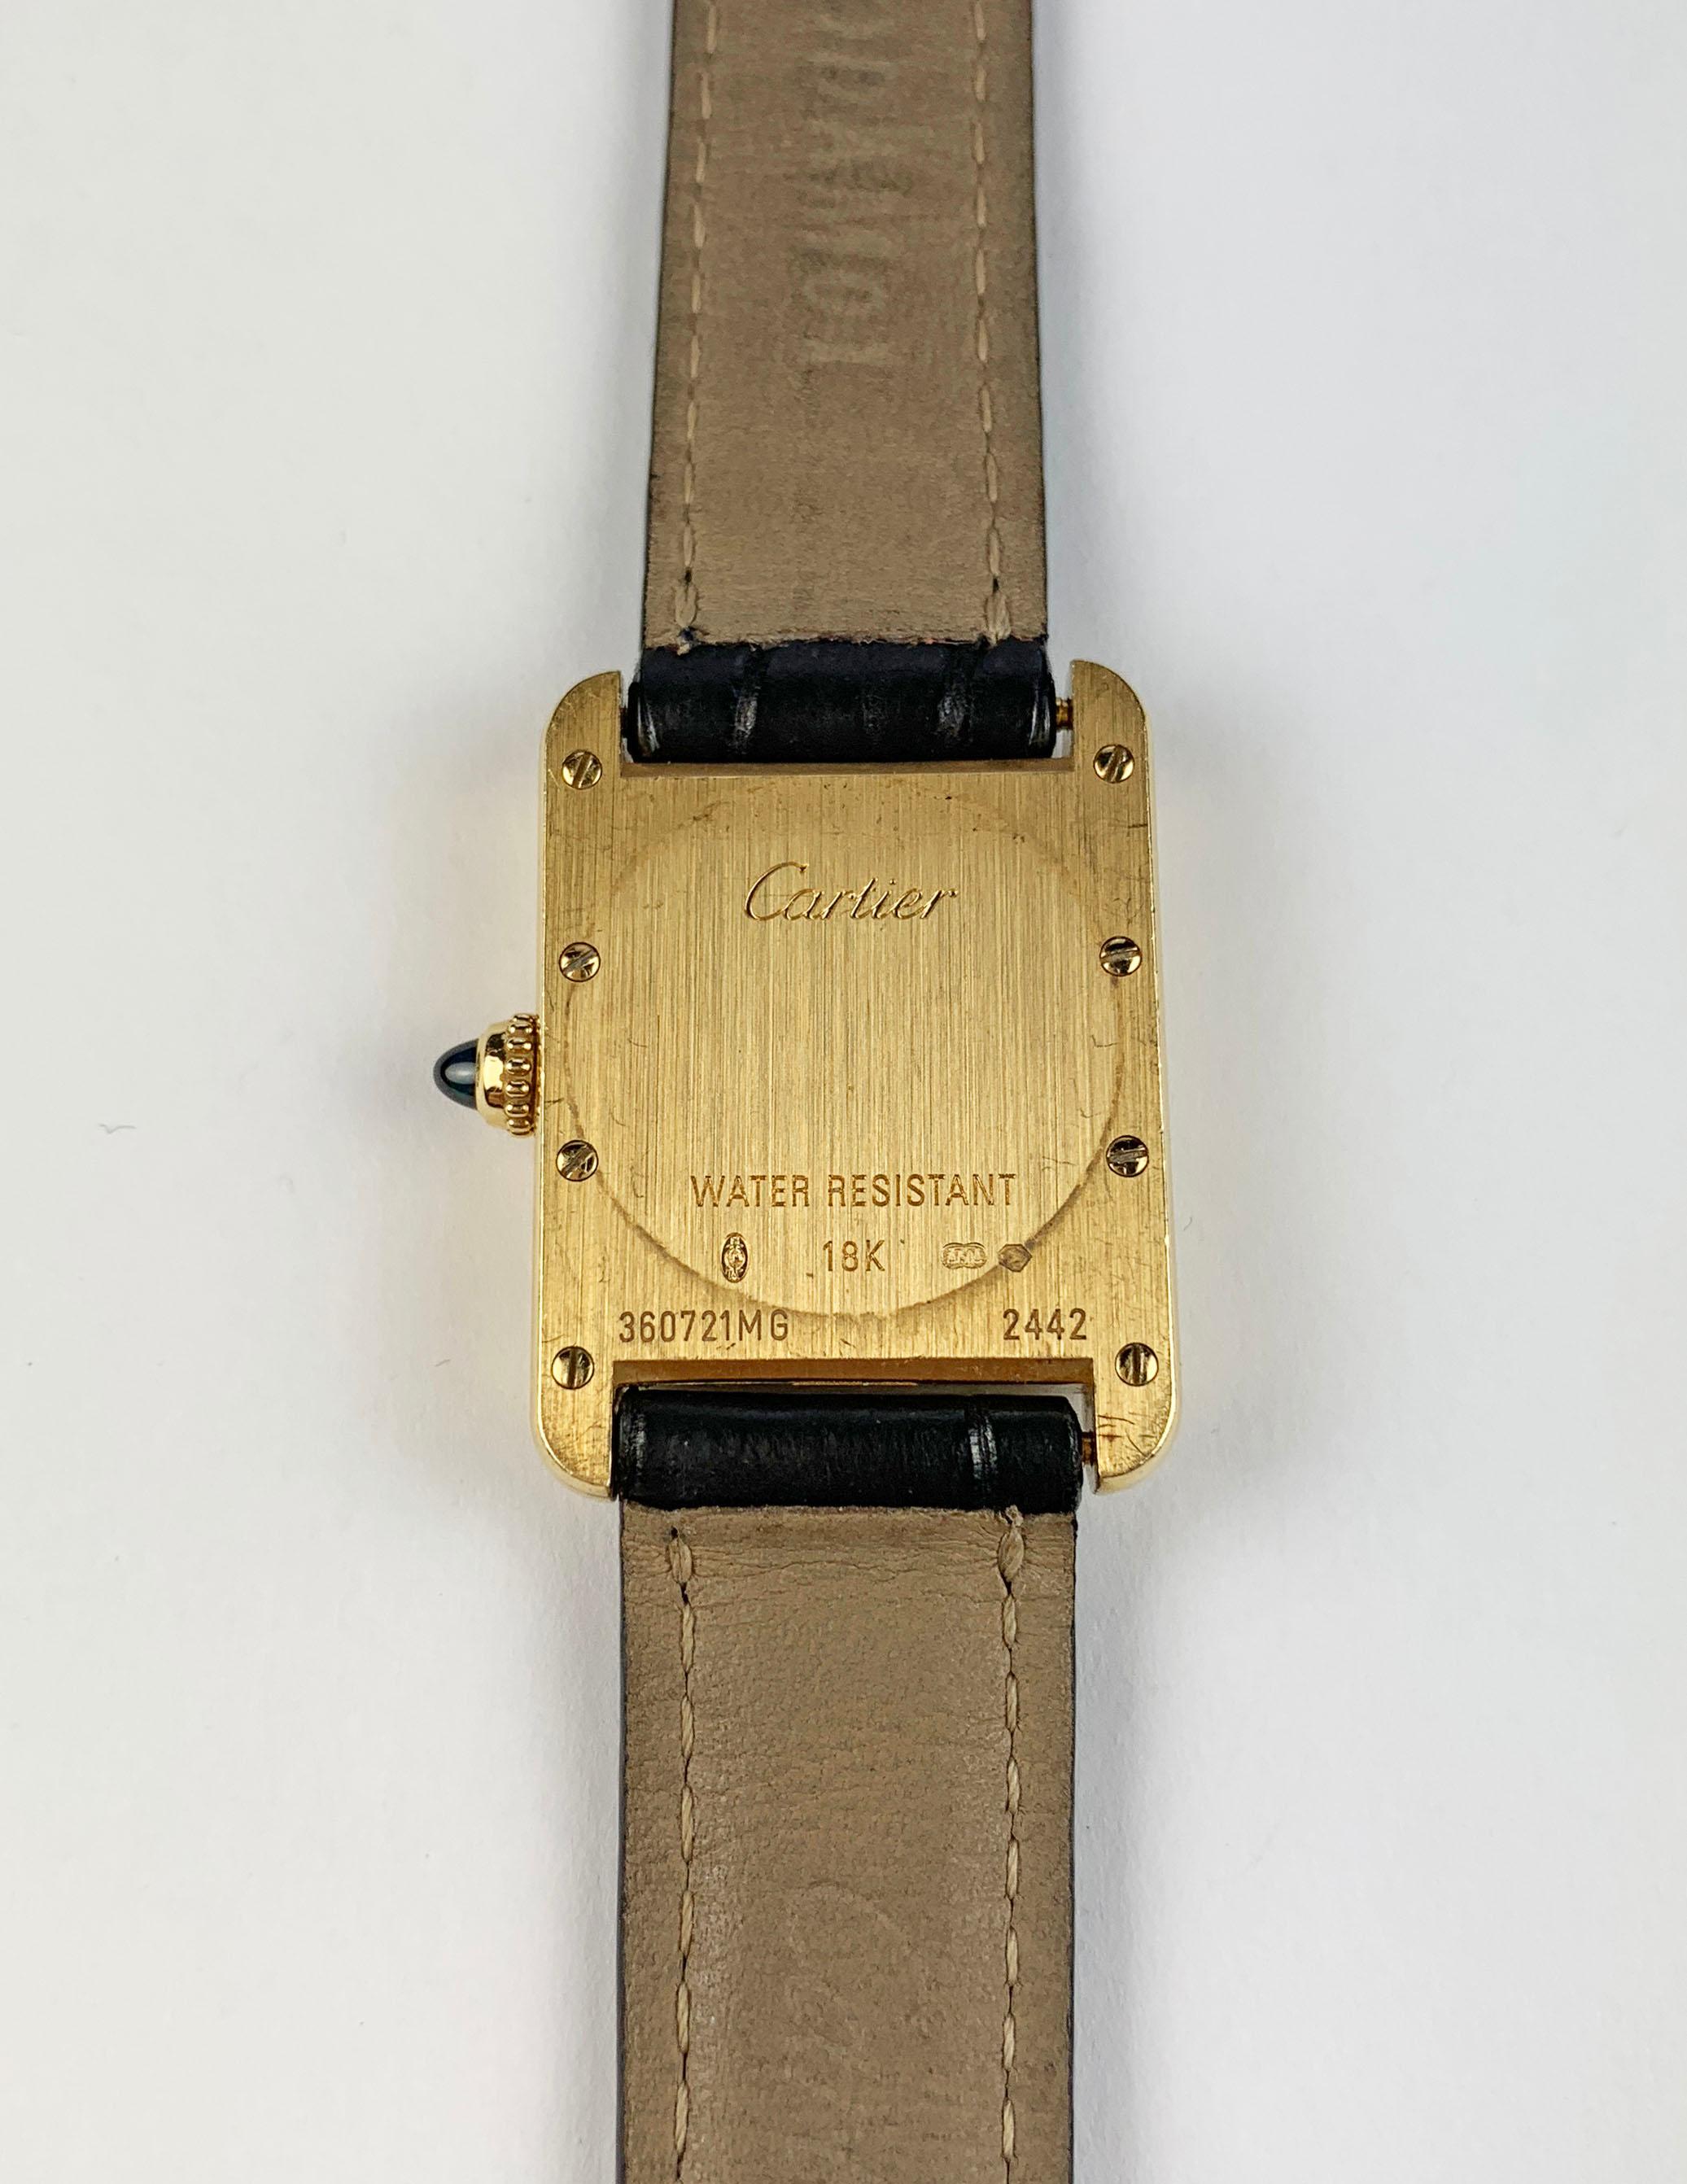 Cartier Paris Yellow Gold Gold Tank Ladies Watch
Cartier Classic Roman Numeral Dial
Signed and Engraved Case-Back
Signed Cartier Leather Strap
29mm x 22mm
Original Signed Cartier 18K Rose Gold Buckle with Hallmarks
One Year Warranty on Movement and